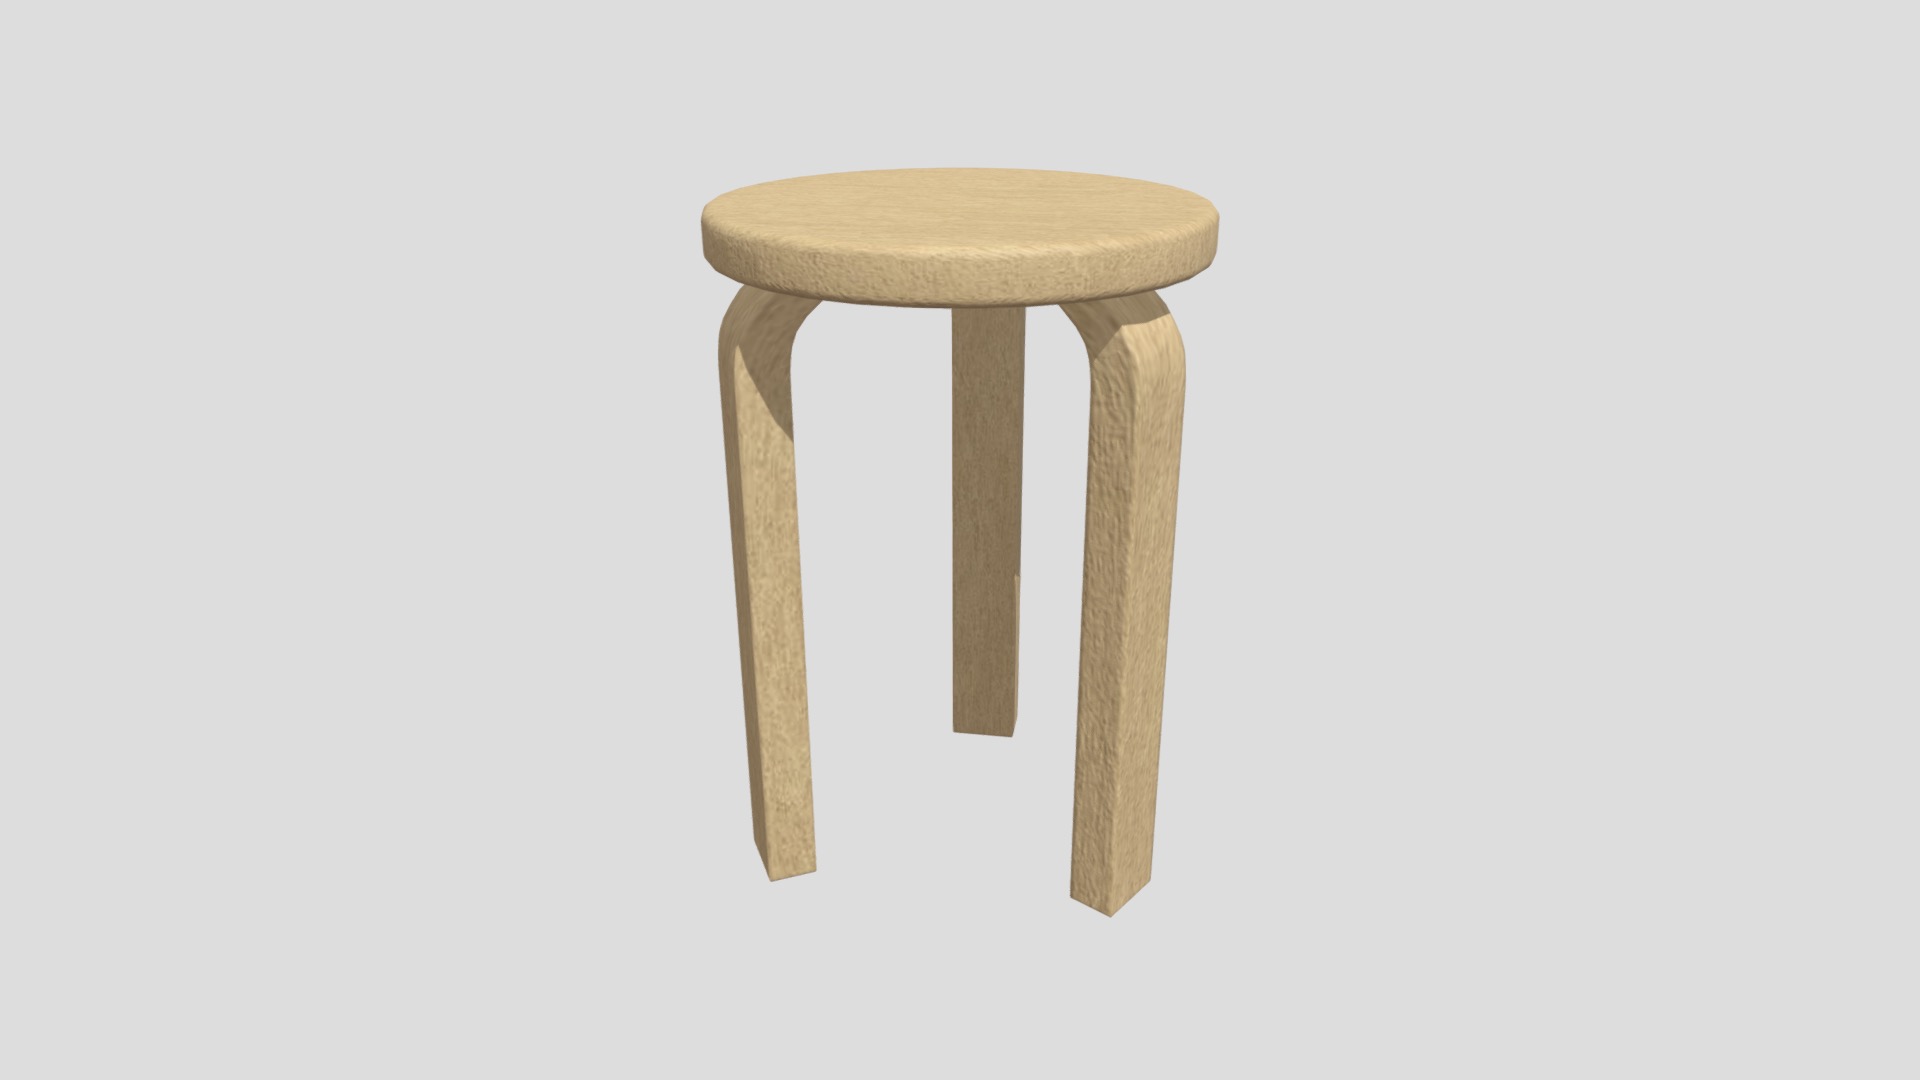 3D model Stool 3 Legs - This is a 3D model of the Stool 3 Legs. The 3D model is about a wooden stool on a white background.